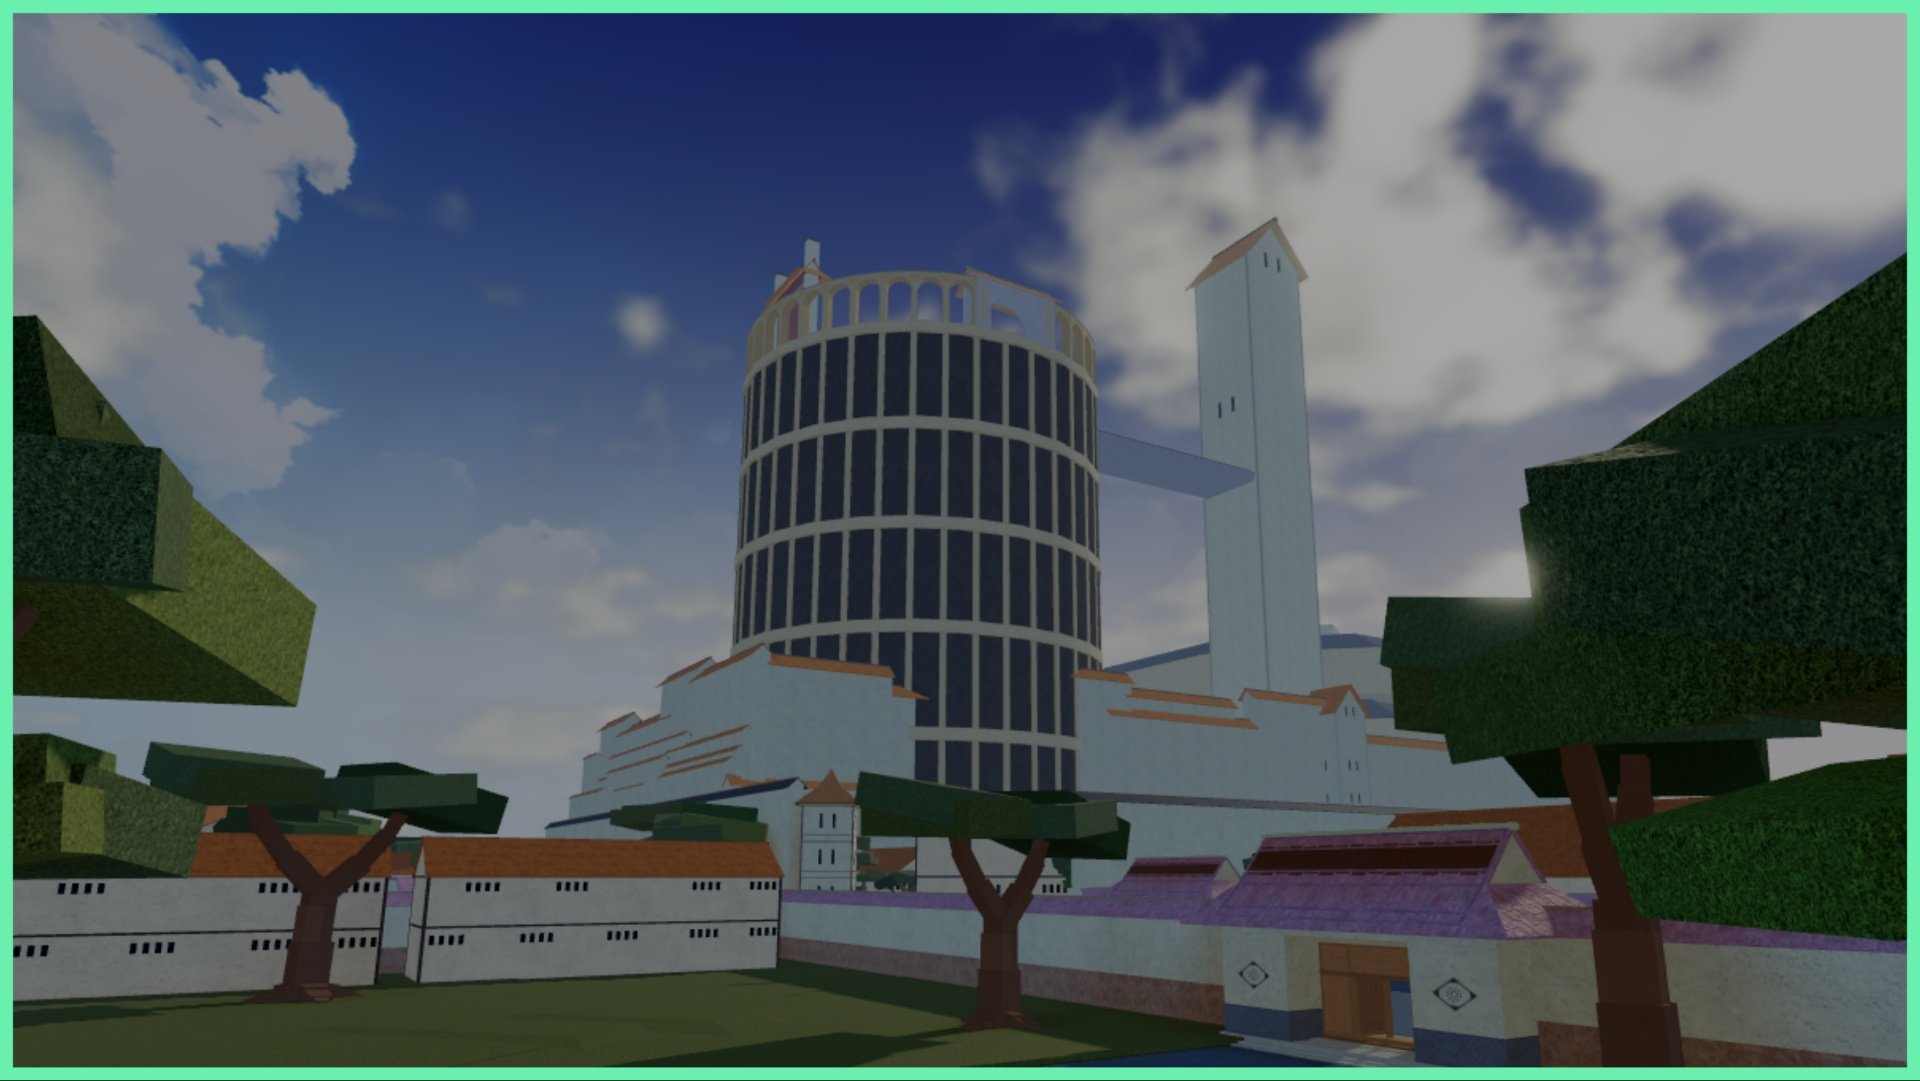 The image shows a bunch of building surrounding the hub of the game. The sky is a bright blue with white clouds. Surrounding the various white and orange buildings are tall trees